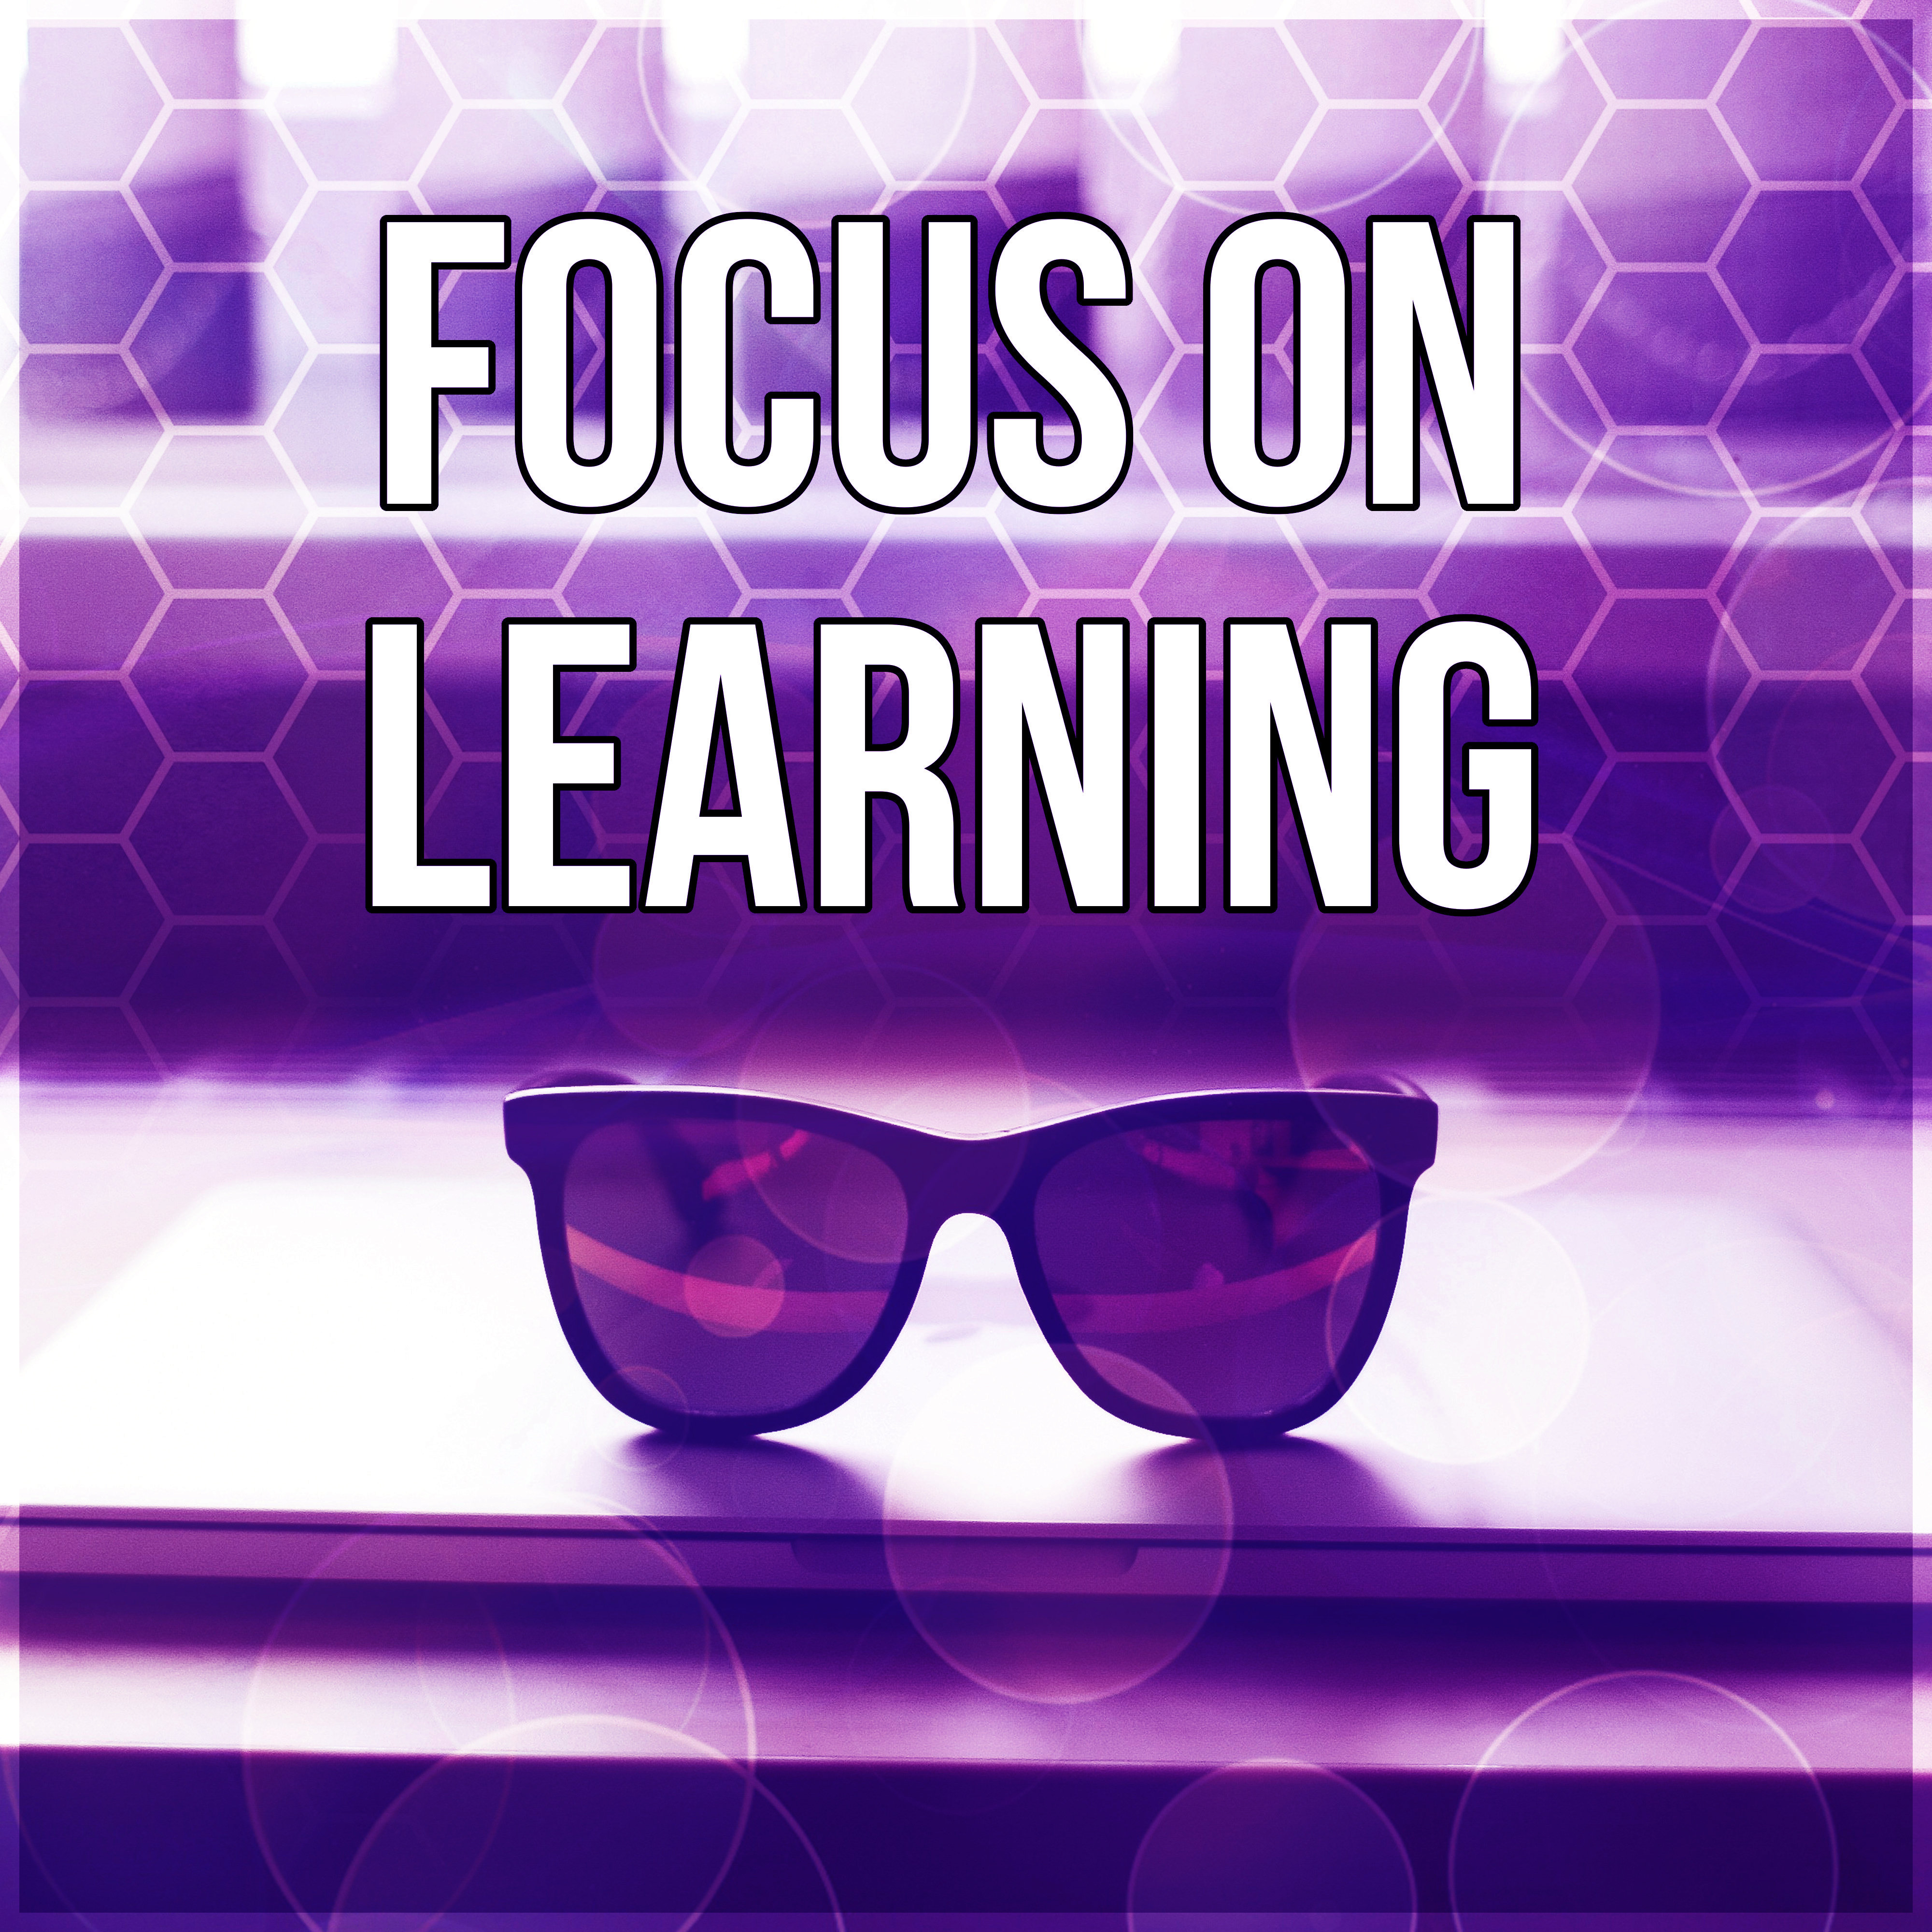 Focus on Learning – Relax Melodies for Exam Study, Deep Brain Stimulation Gray Matters, Concentration Study Music to Increase Brain Power